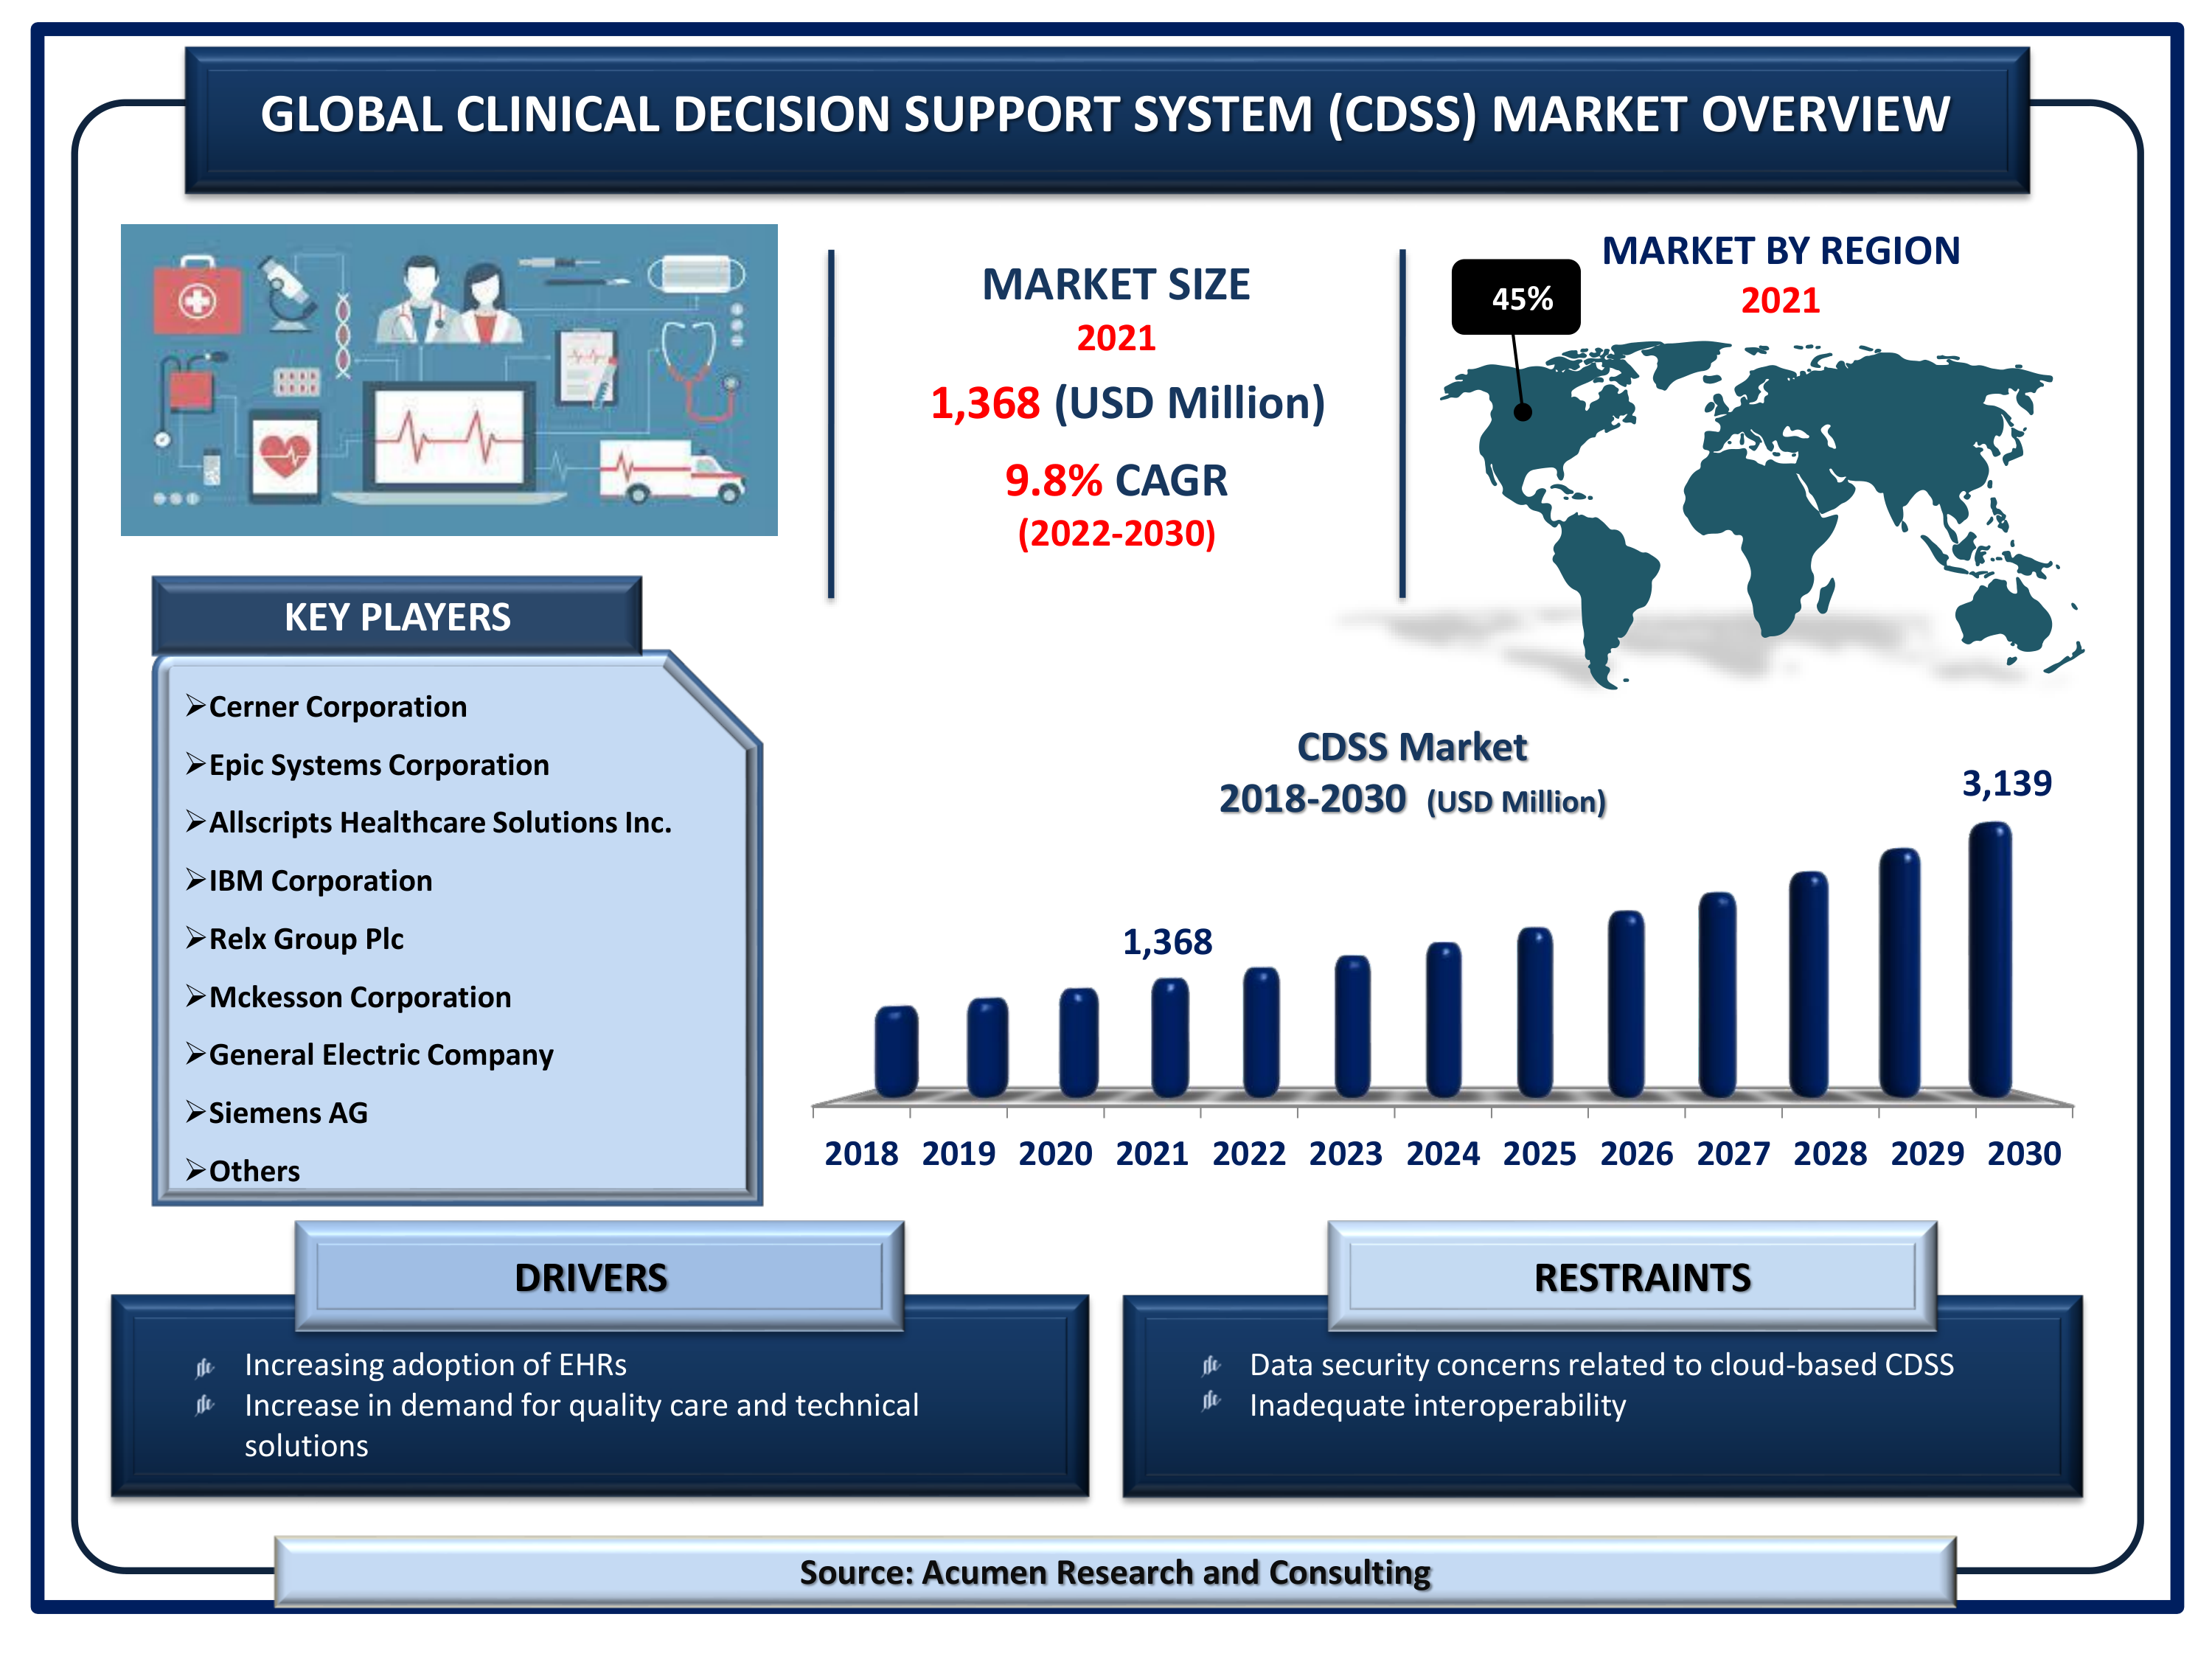 The Global Clinical Decision Support System Market Size is valued at USD 1,368 million in 2021 and is estimated to achieve a market size of USD 3,139 million by 2030; growing at a CAGR of 9.8%.